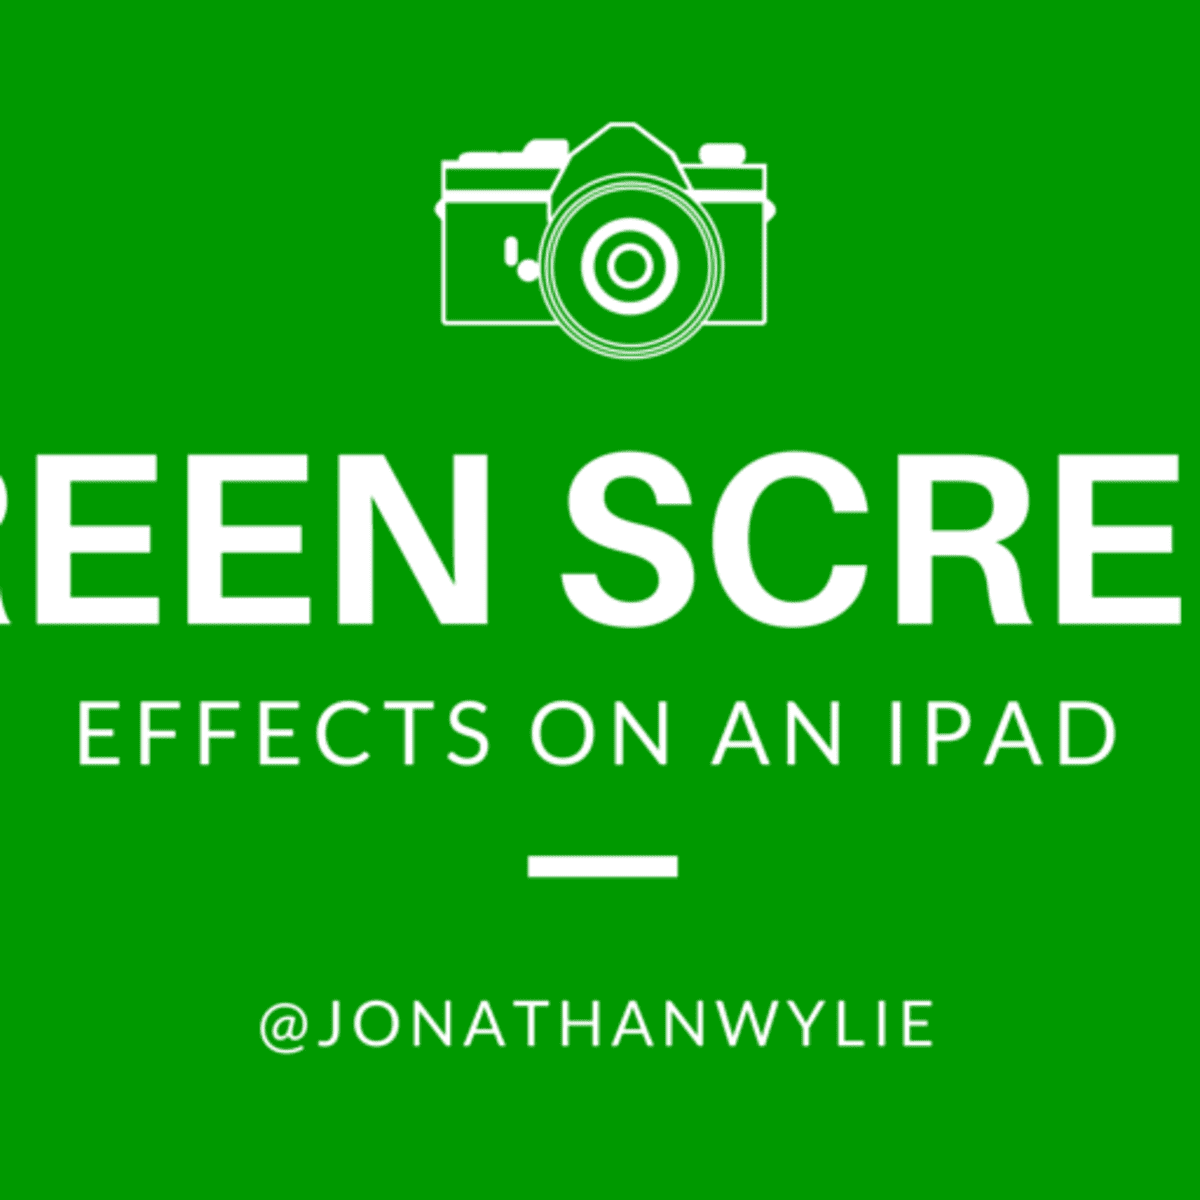 What Is A Green Screen Scan?